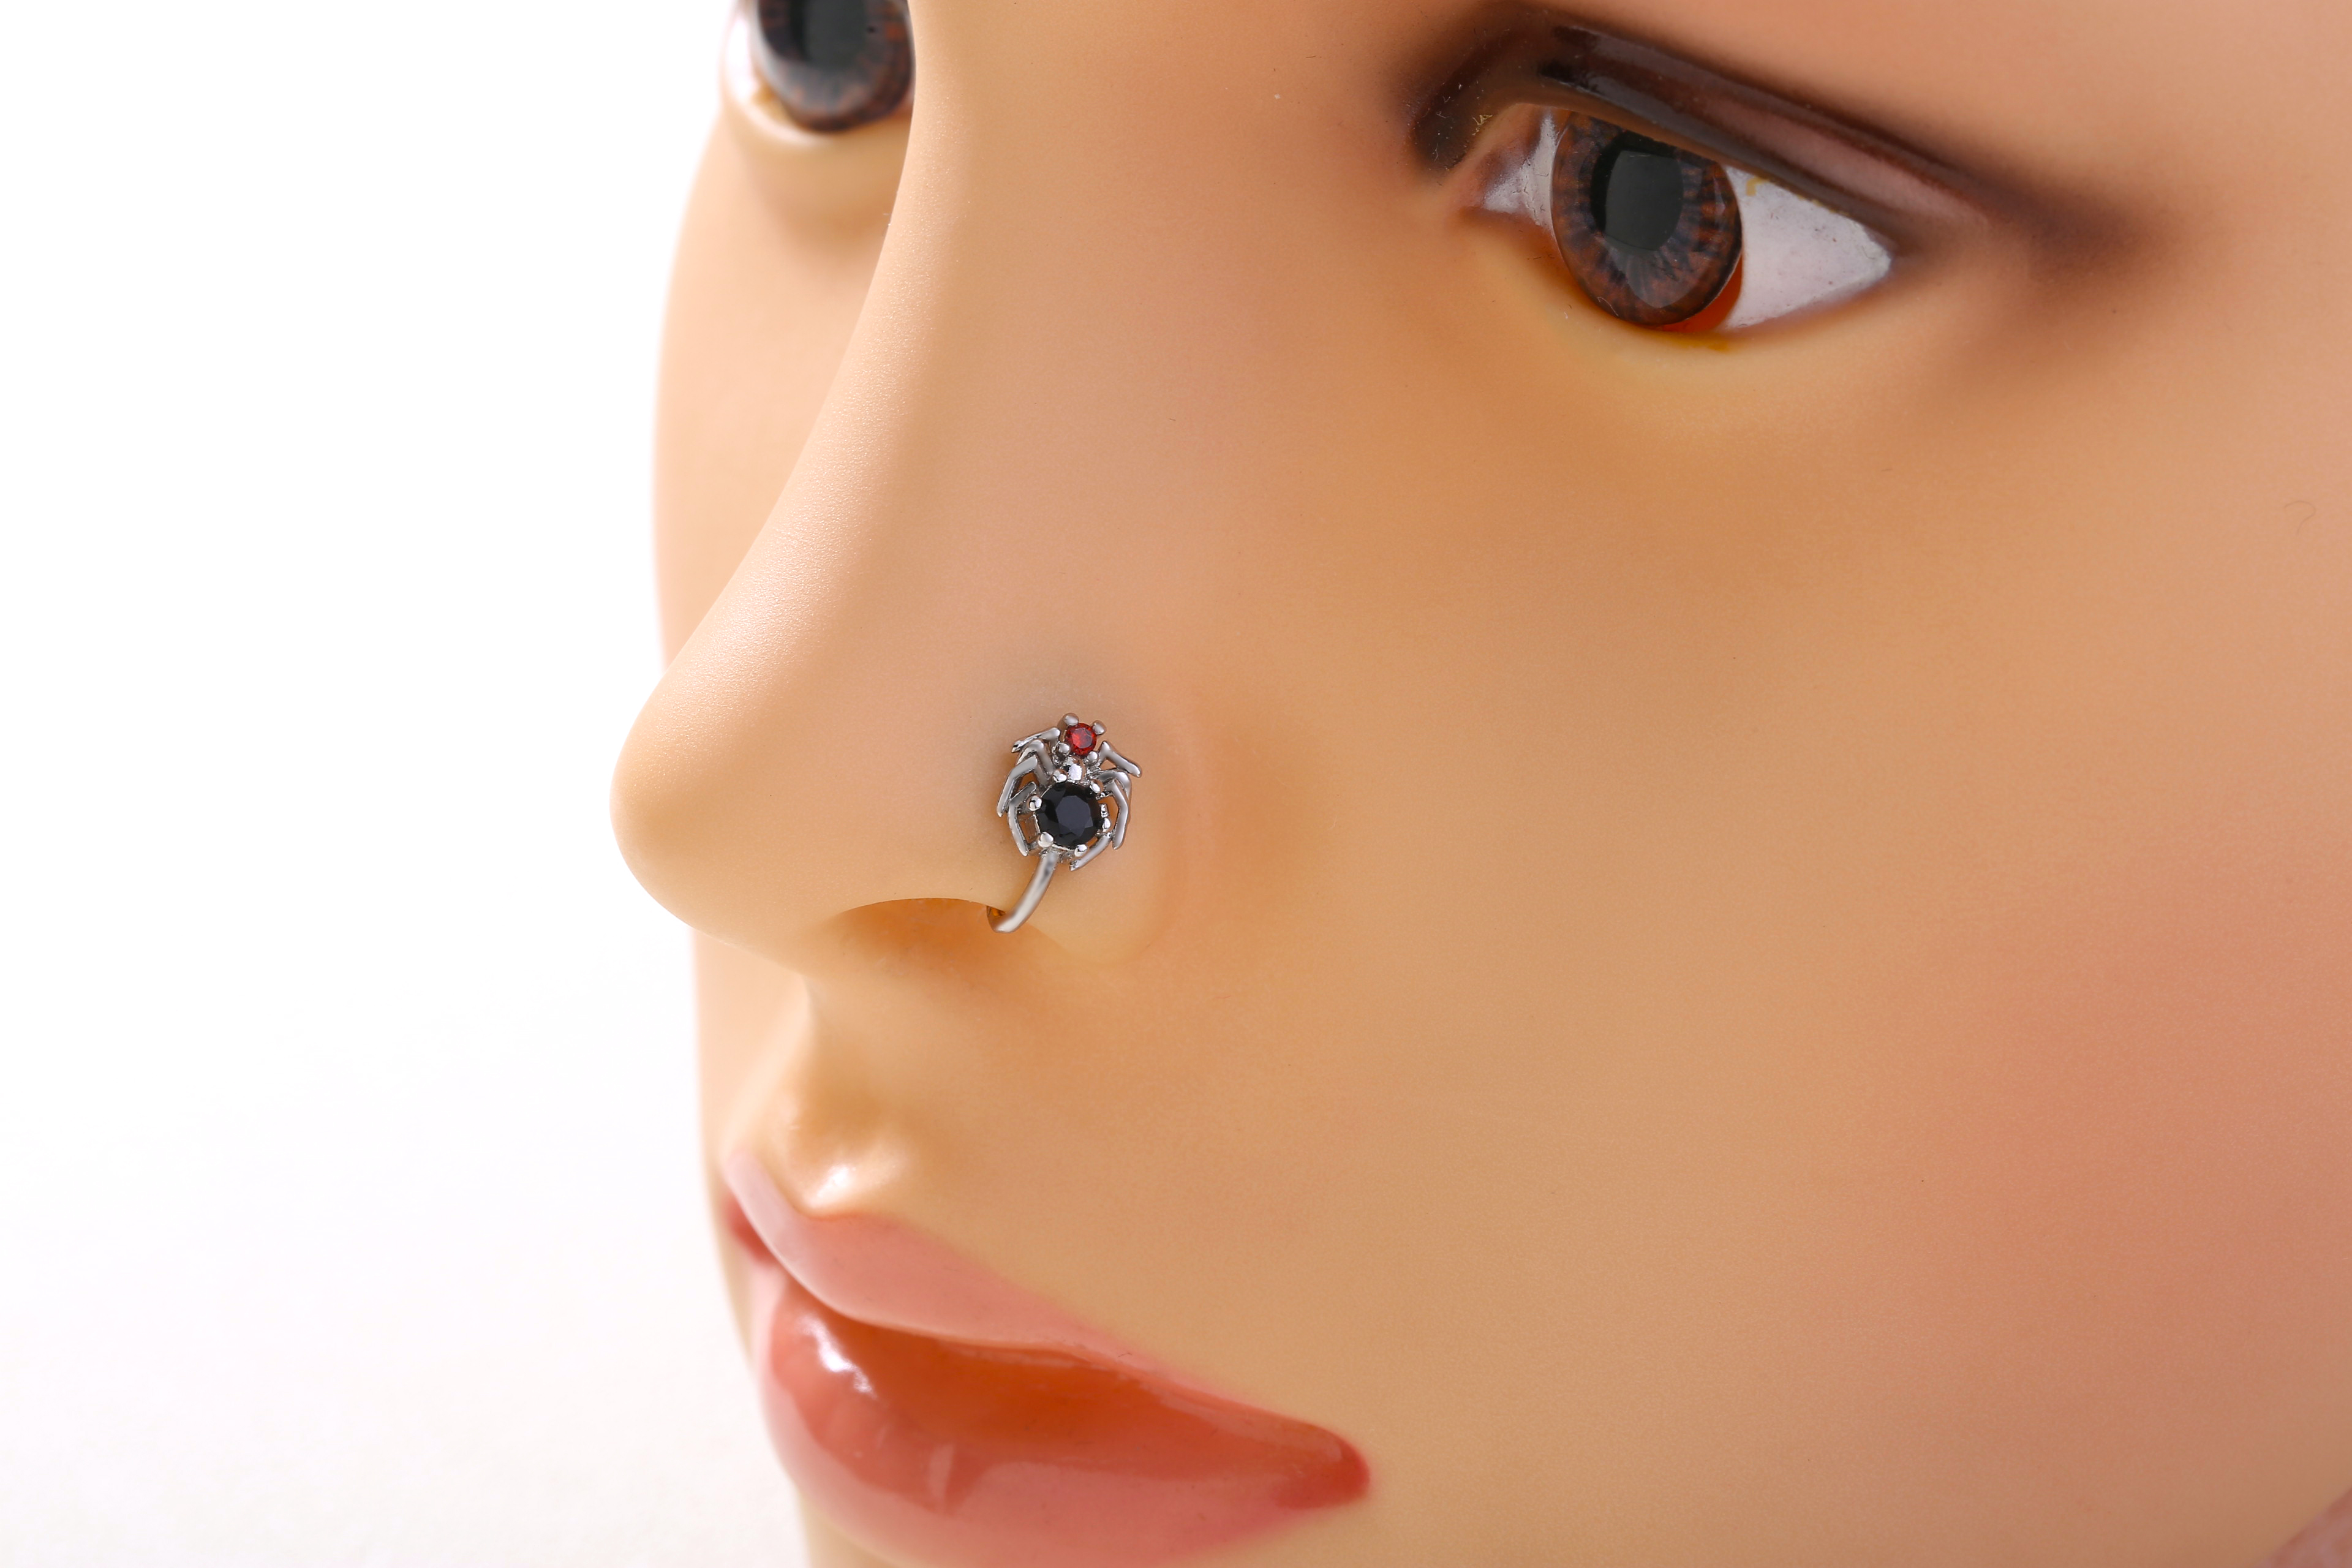 New Cute Animal Spider Micro Inlaid Zircon PerforationFree Piercing Copper Nose Ringpicture1